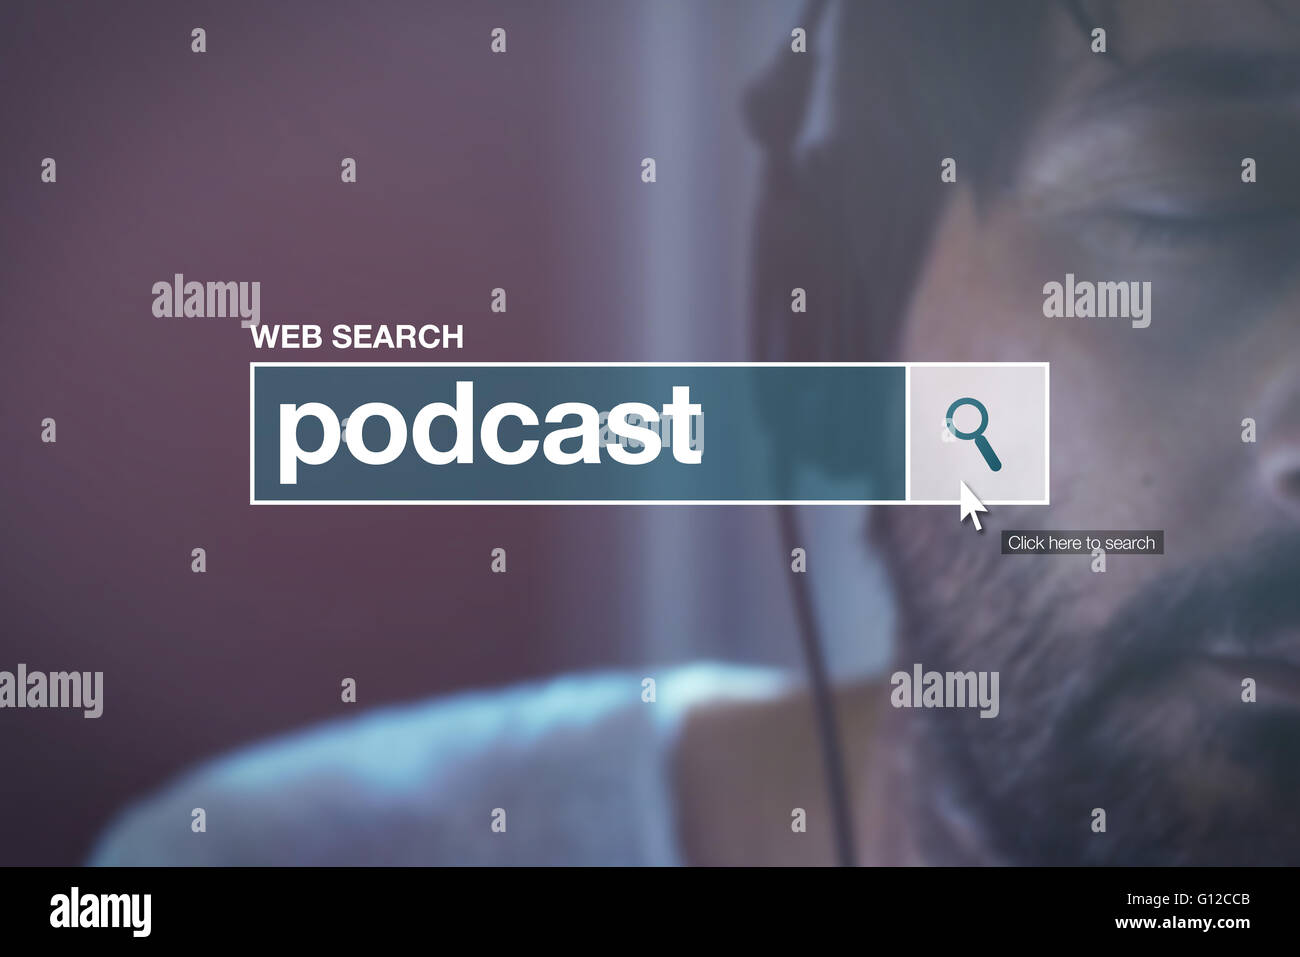 Podcast - web search bar glossary term for definition in internet glossary. Stock Photo